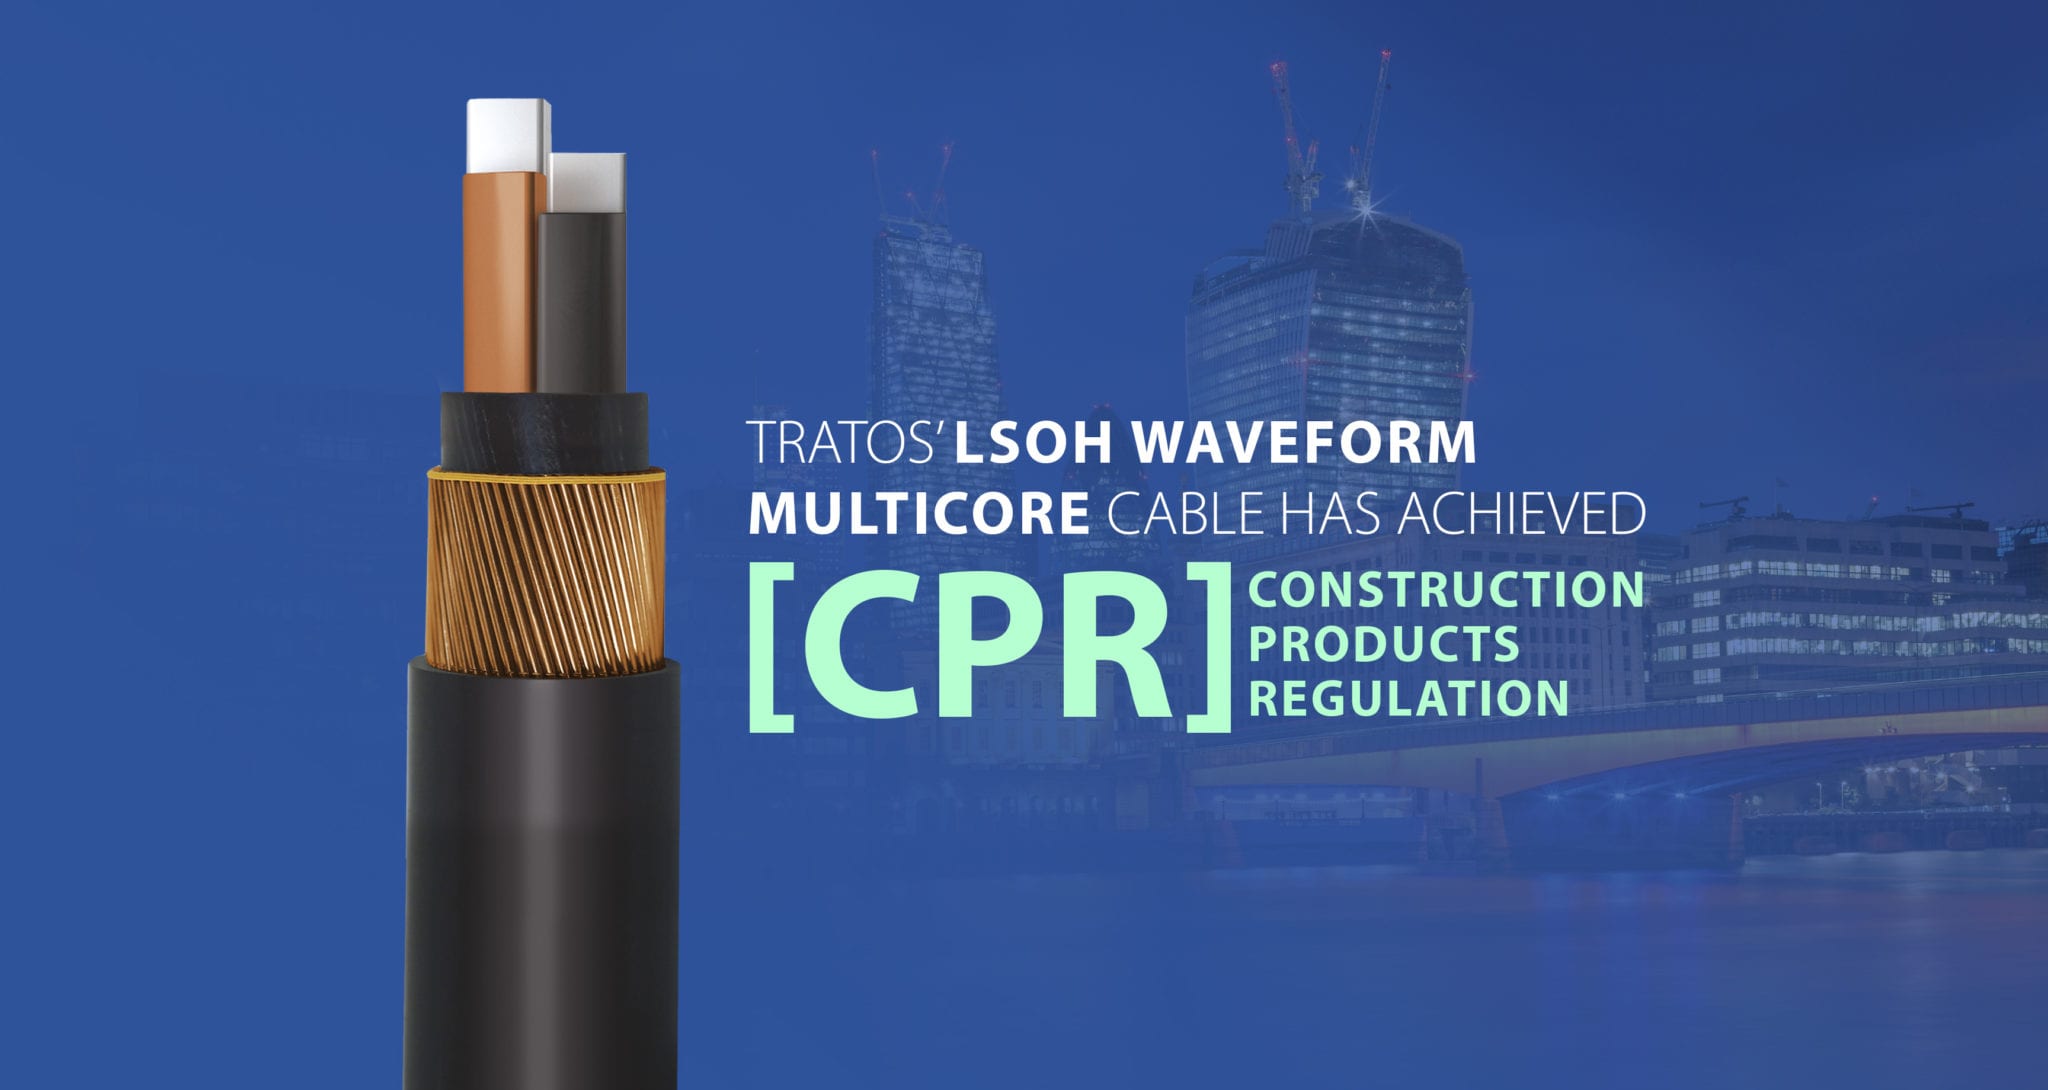 Tratos LSOH Waveform CPR compliant - Made in Britain - UK - Basec Approved